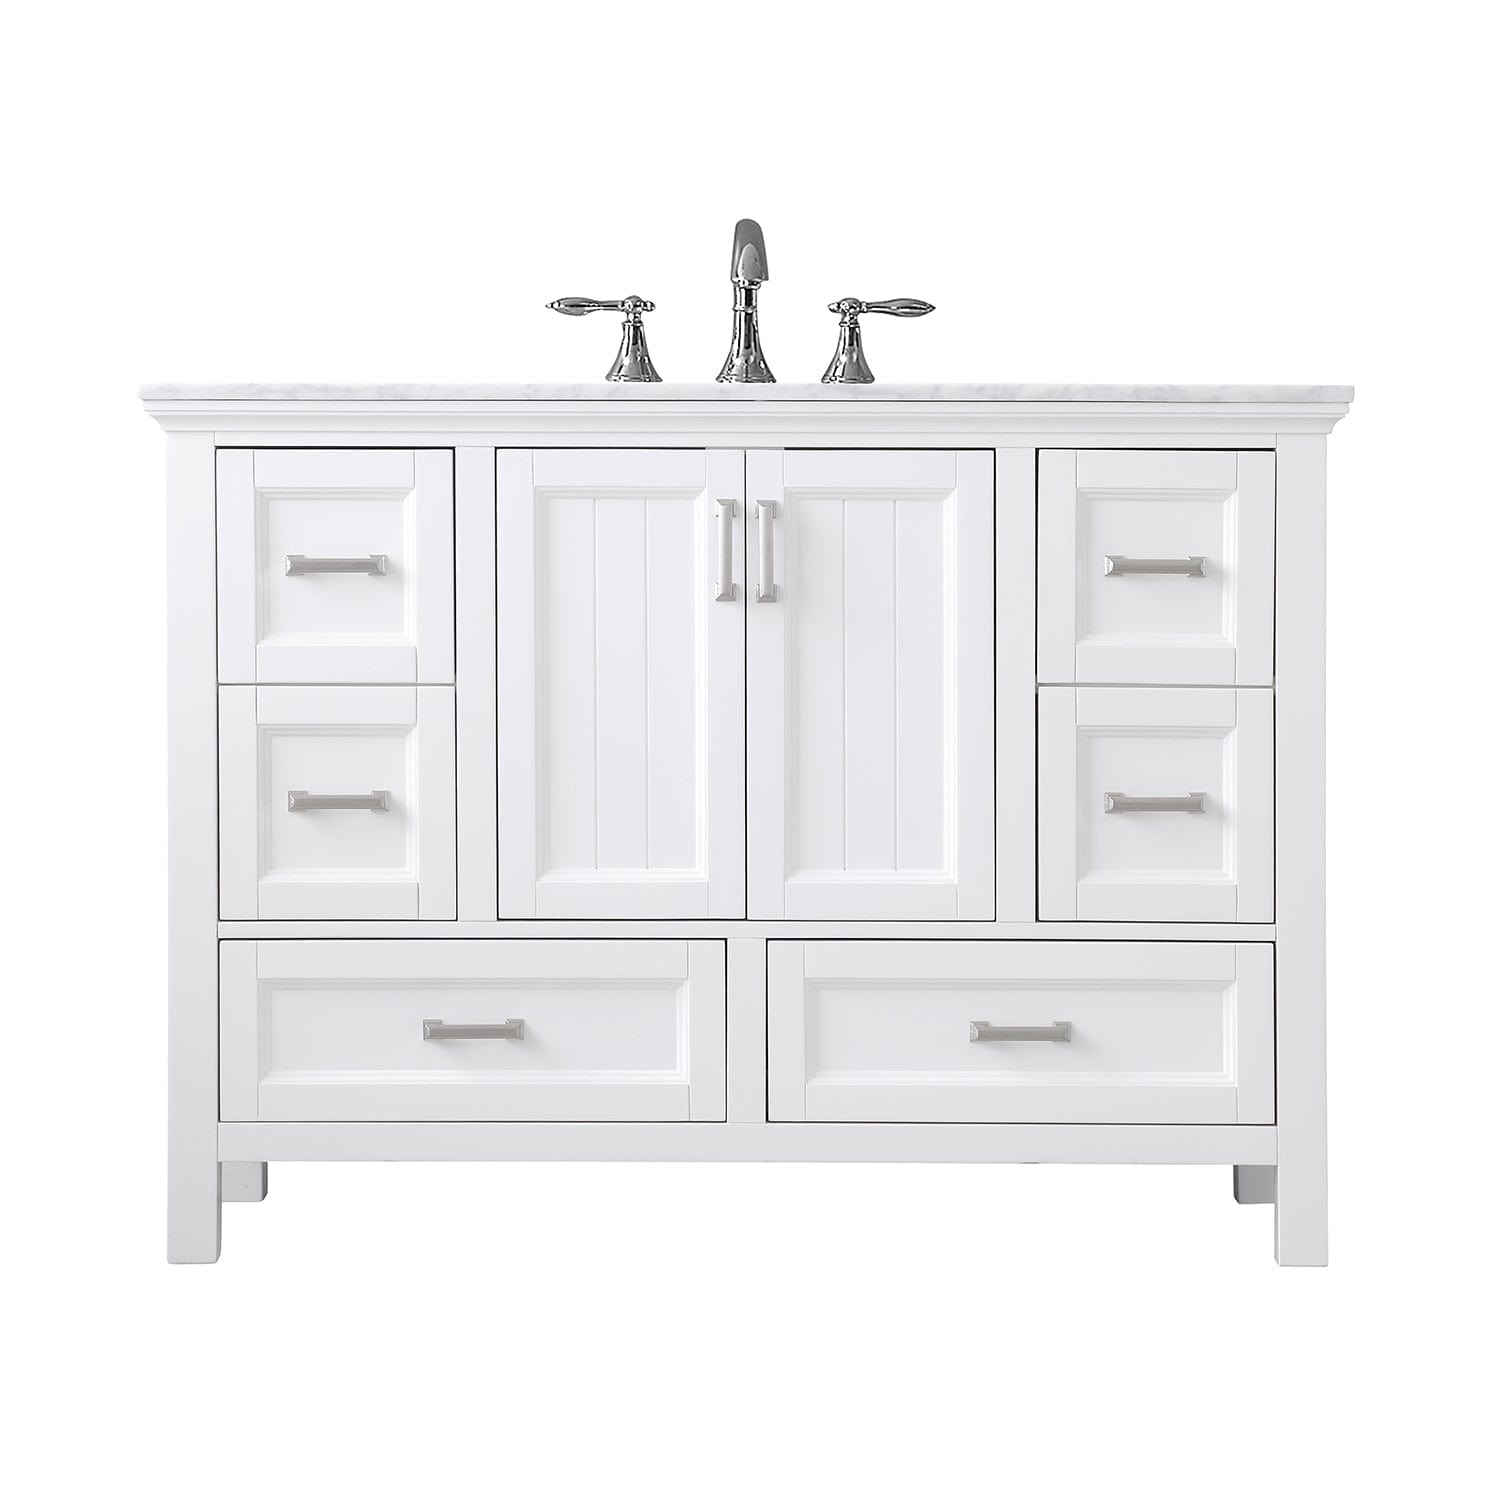 Altair Isla 48" Single Bathroom Vanity Set in White and Carrara White Marble Countertop without Mirror 538048-WH-CA-NM - Molaix631112970884Vanity538048-WH-CA-NM